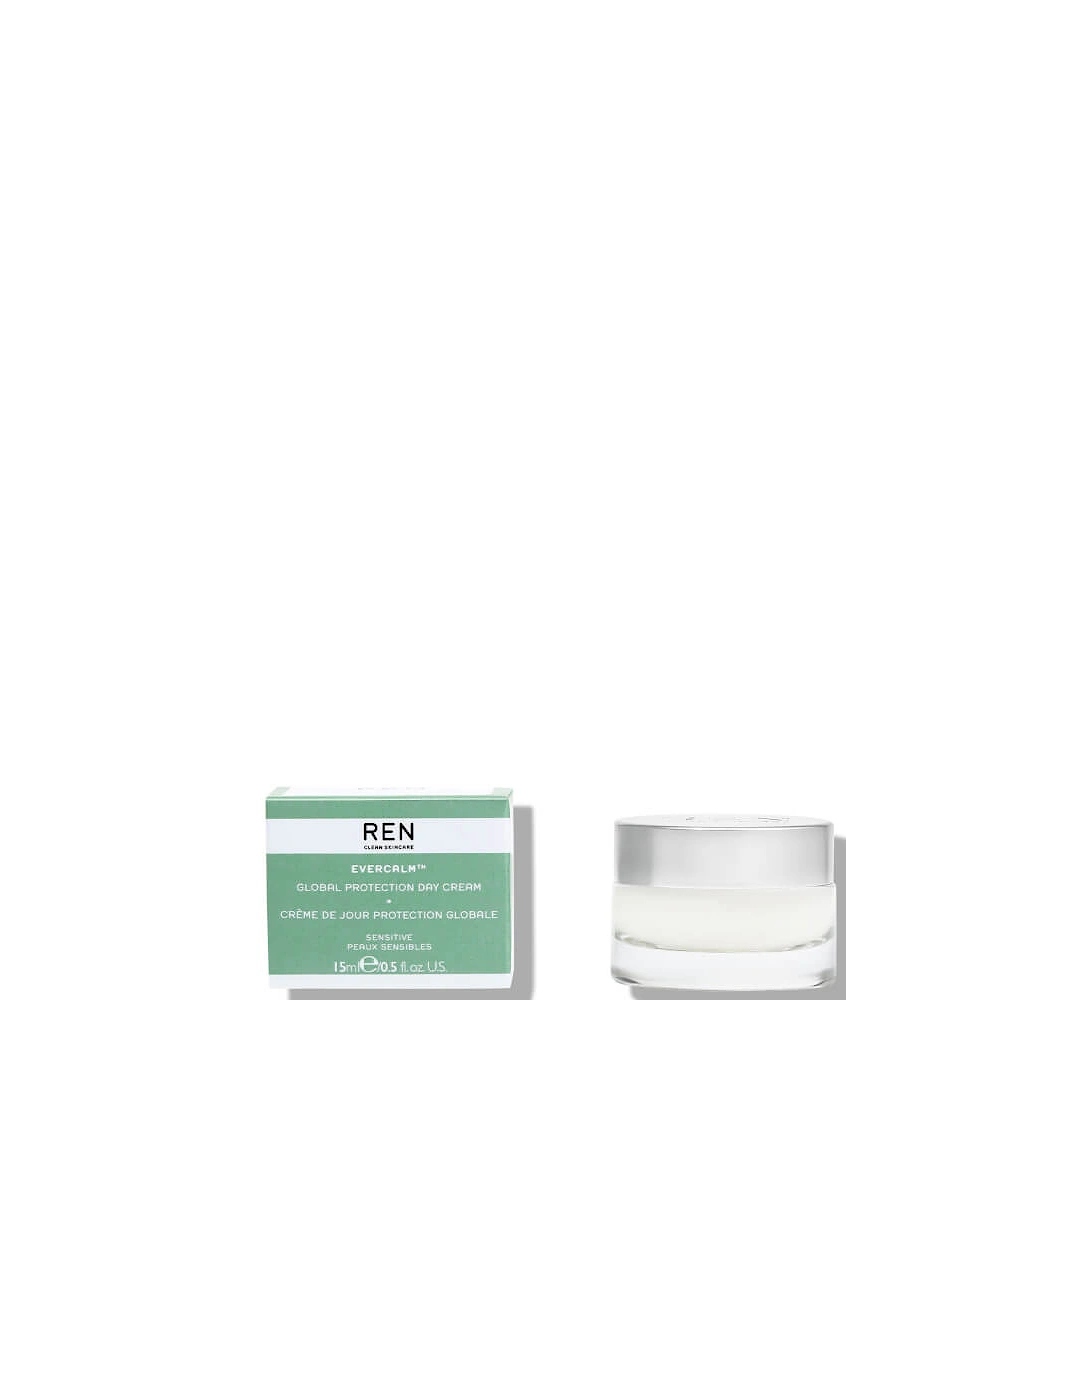 Evercalm Global Protection Day Cream 15ml, 2 of 1